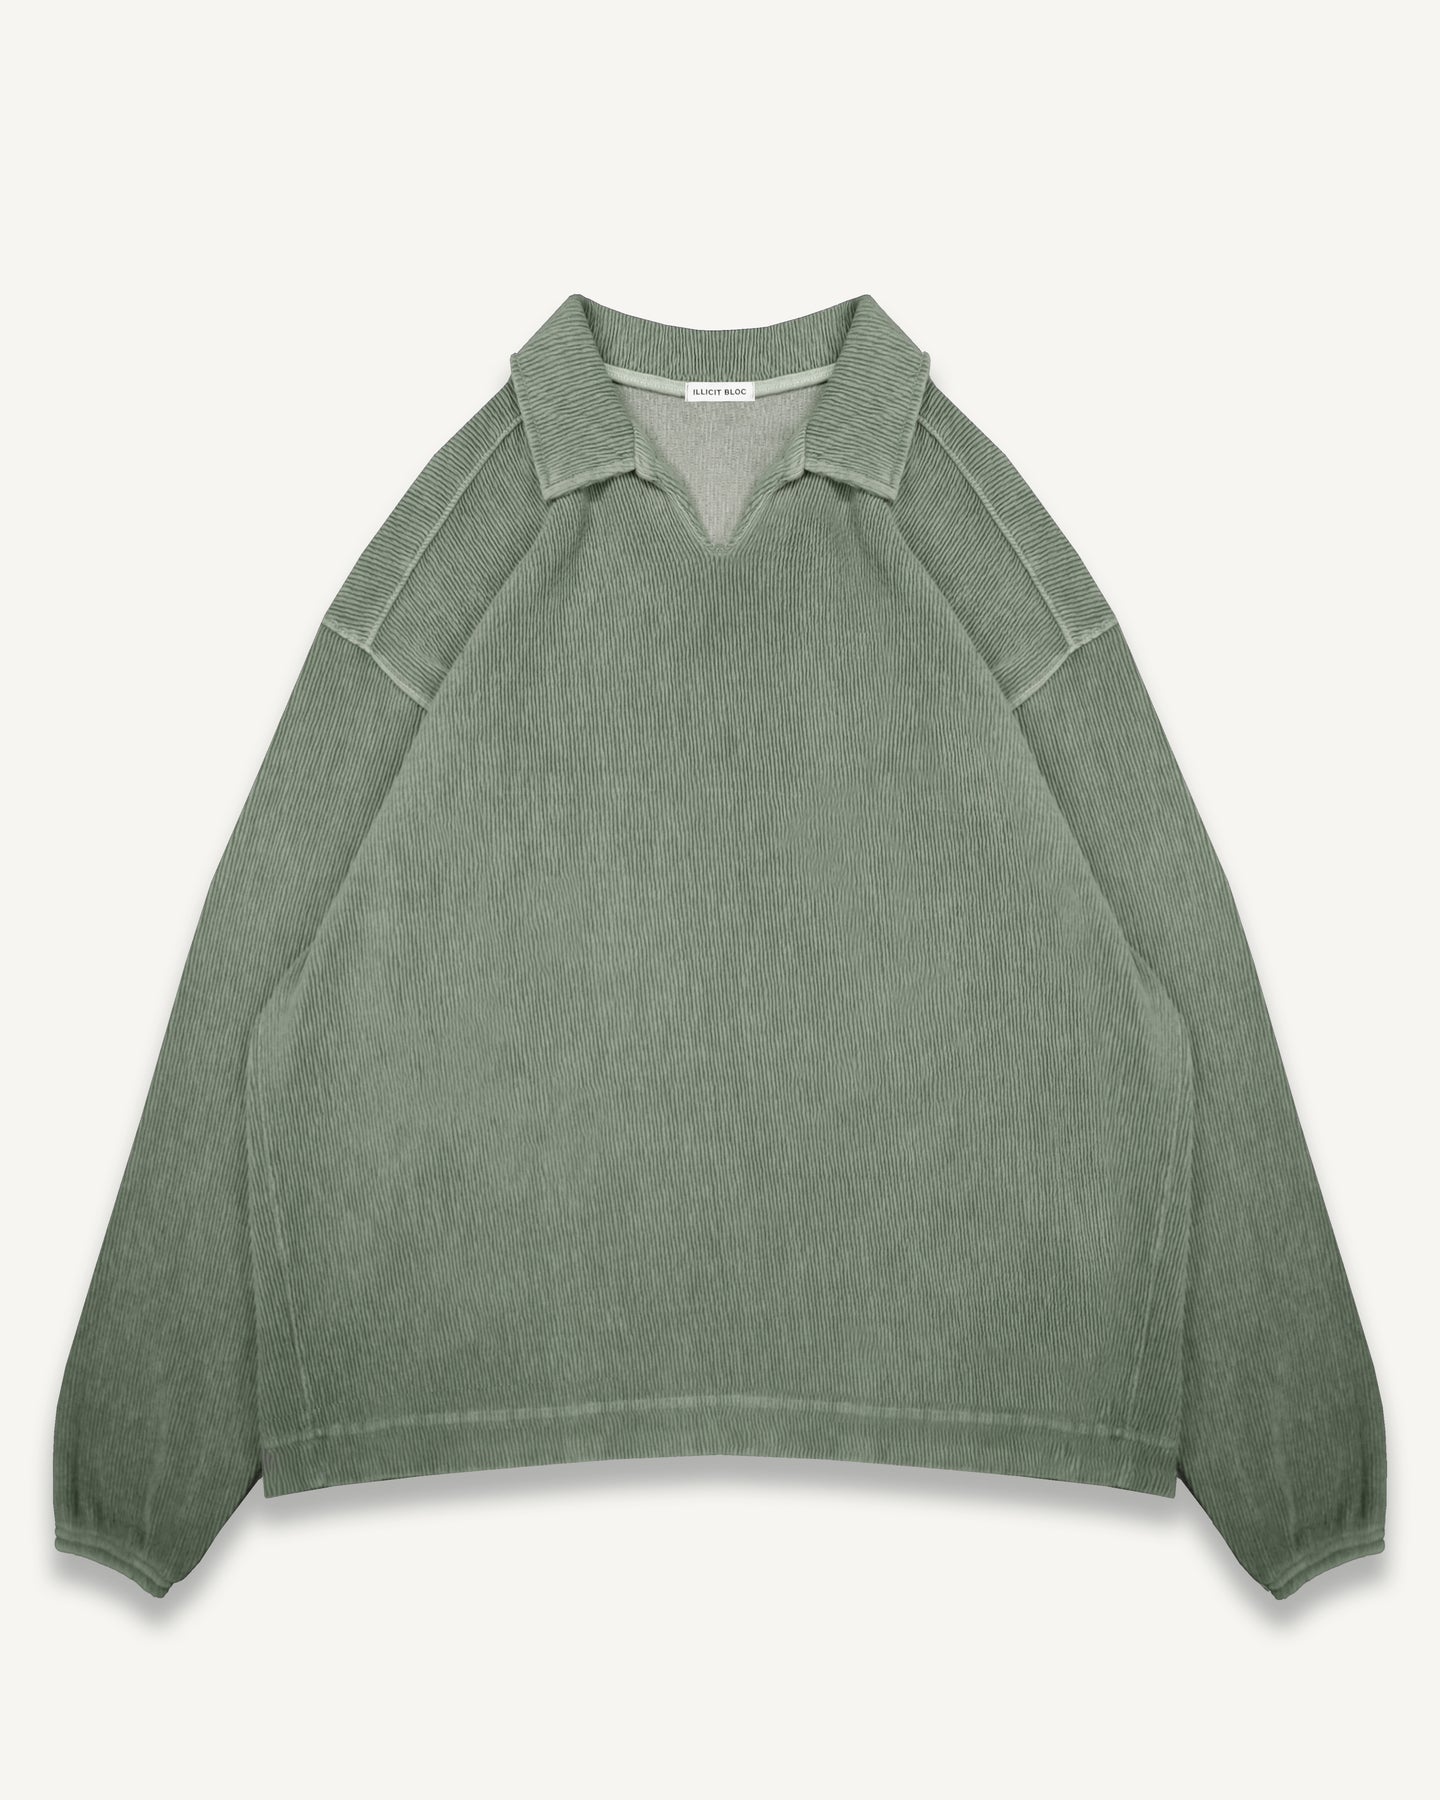 DRILL TOP - WASHED OLIVE